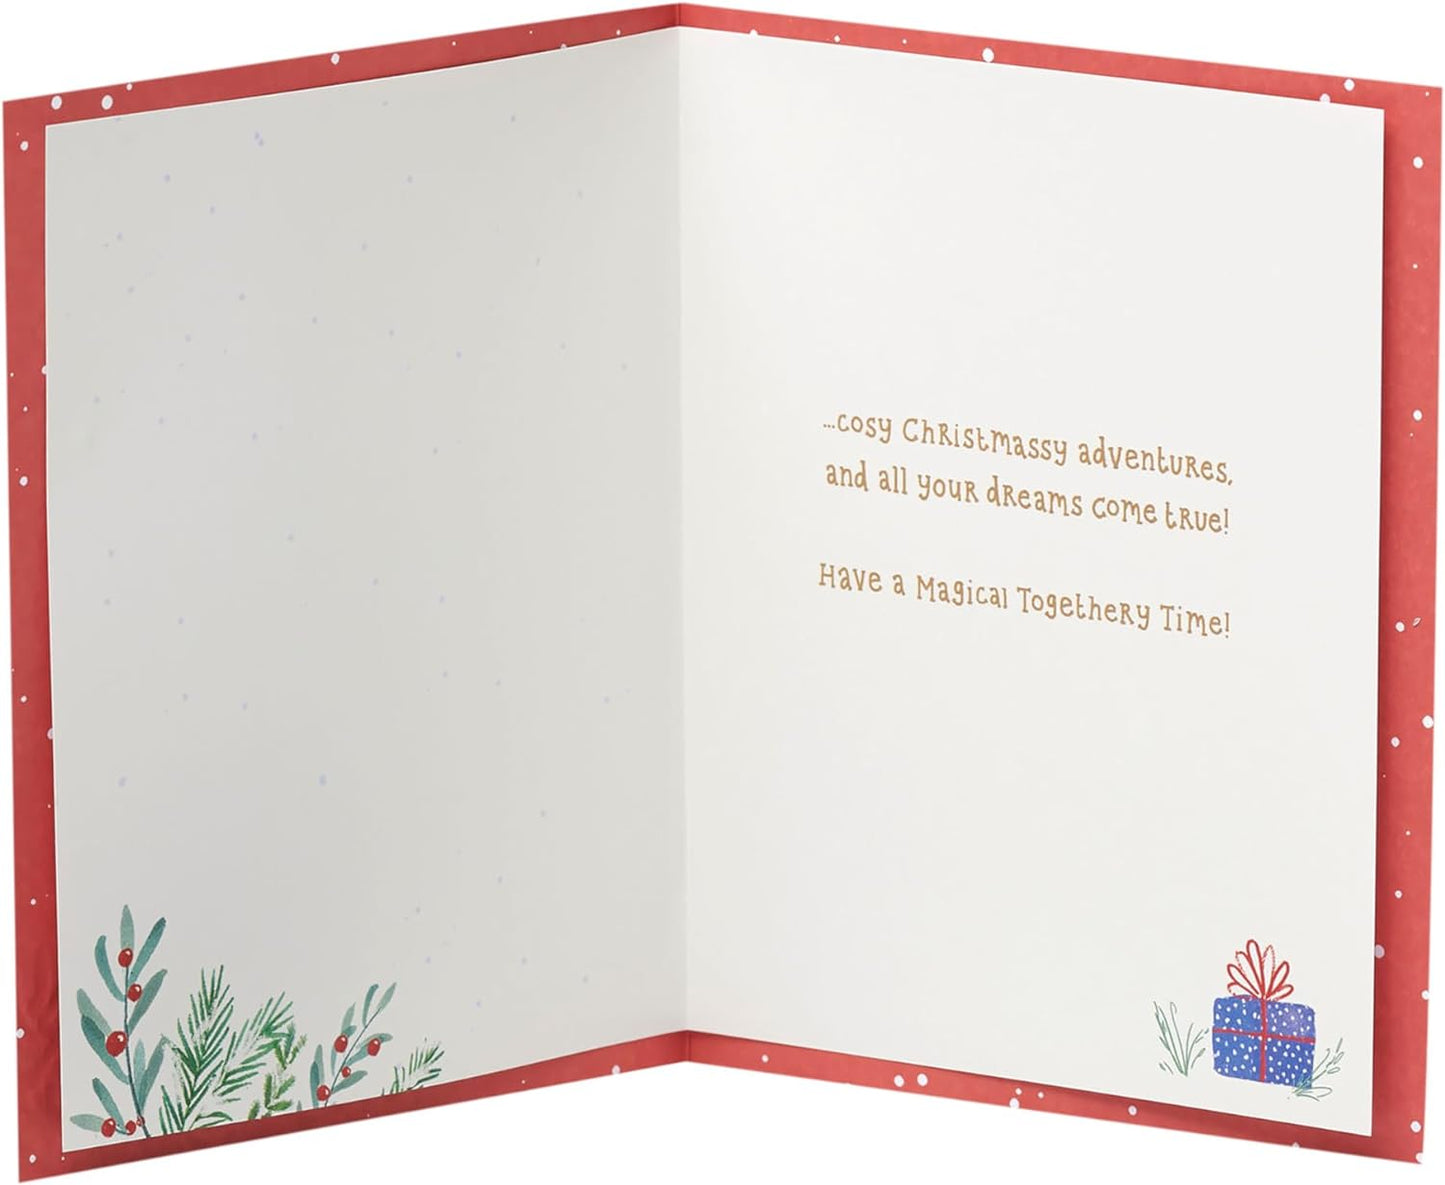 All of You Christmas Card Disney Winnie the Pooh & Friends Design